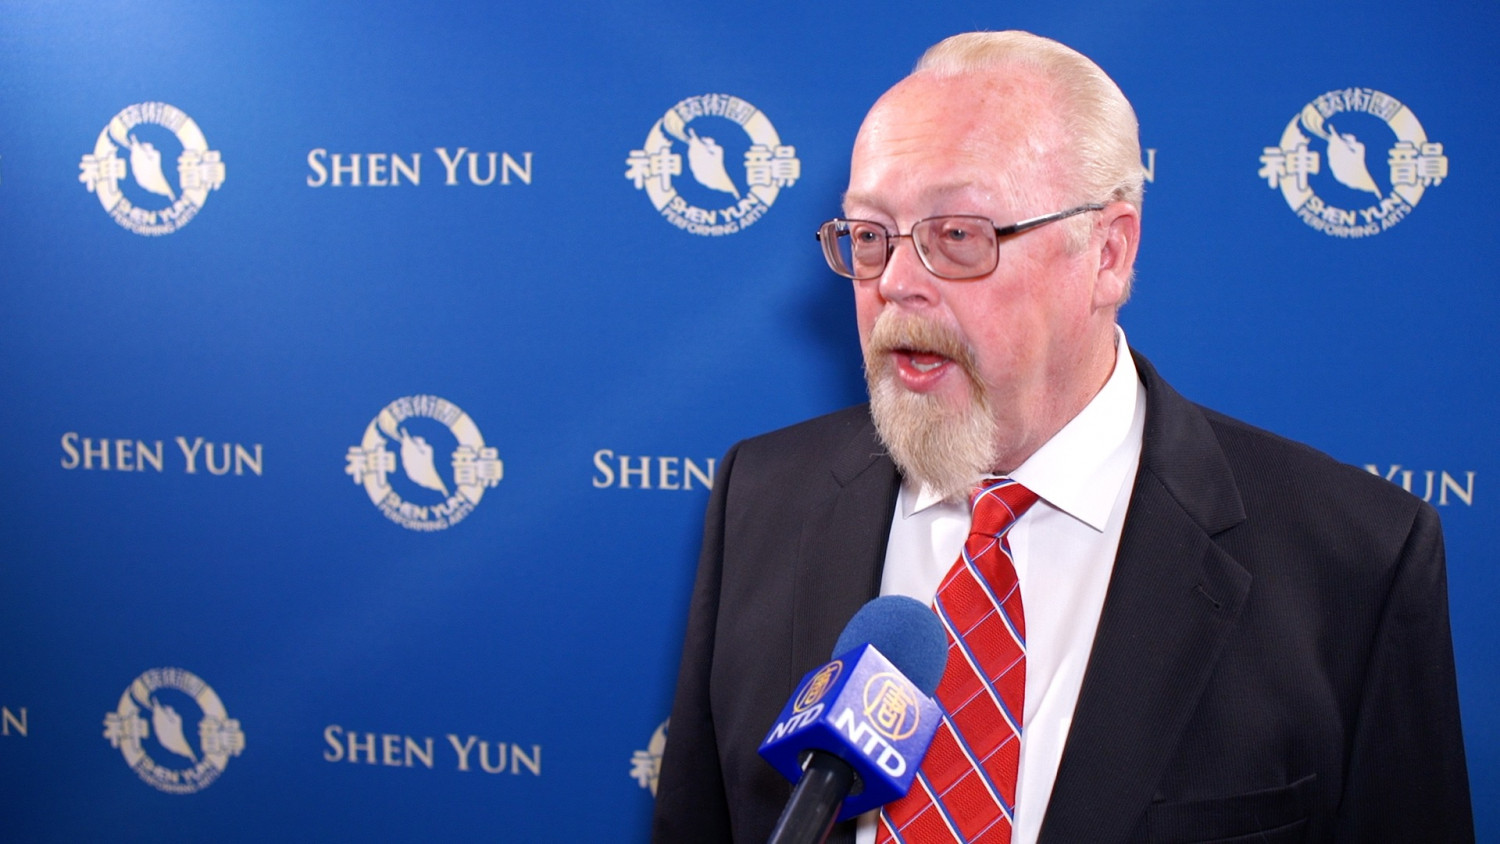 Business Owners Praise Shen Yun’s Performance Level